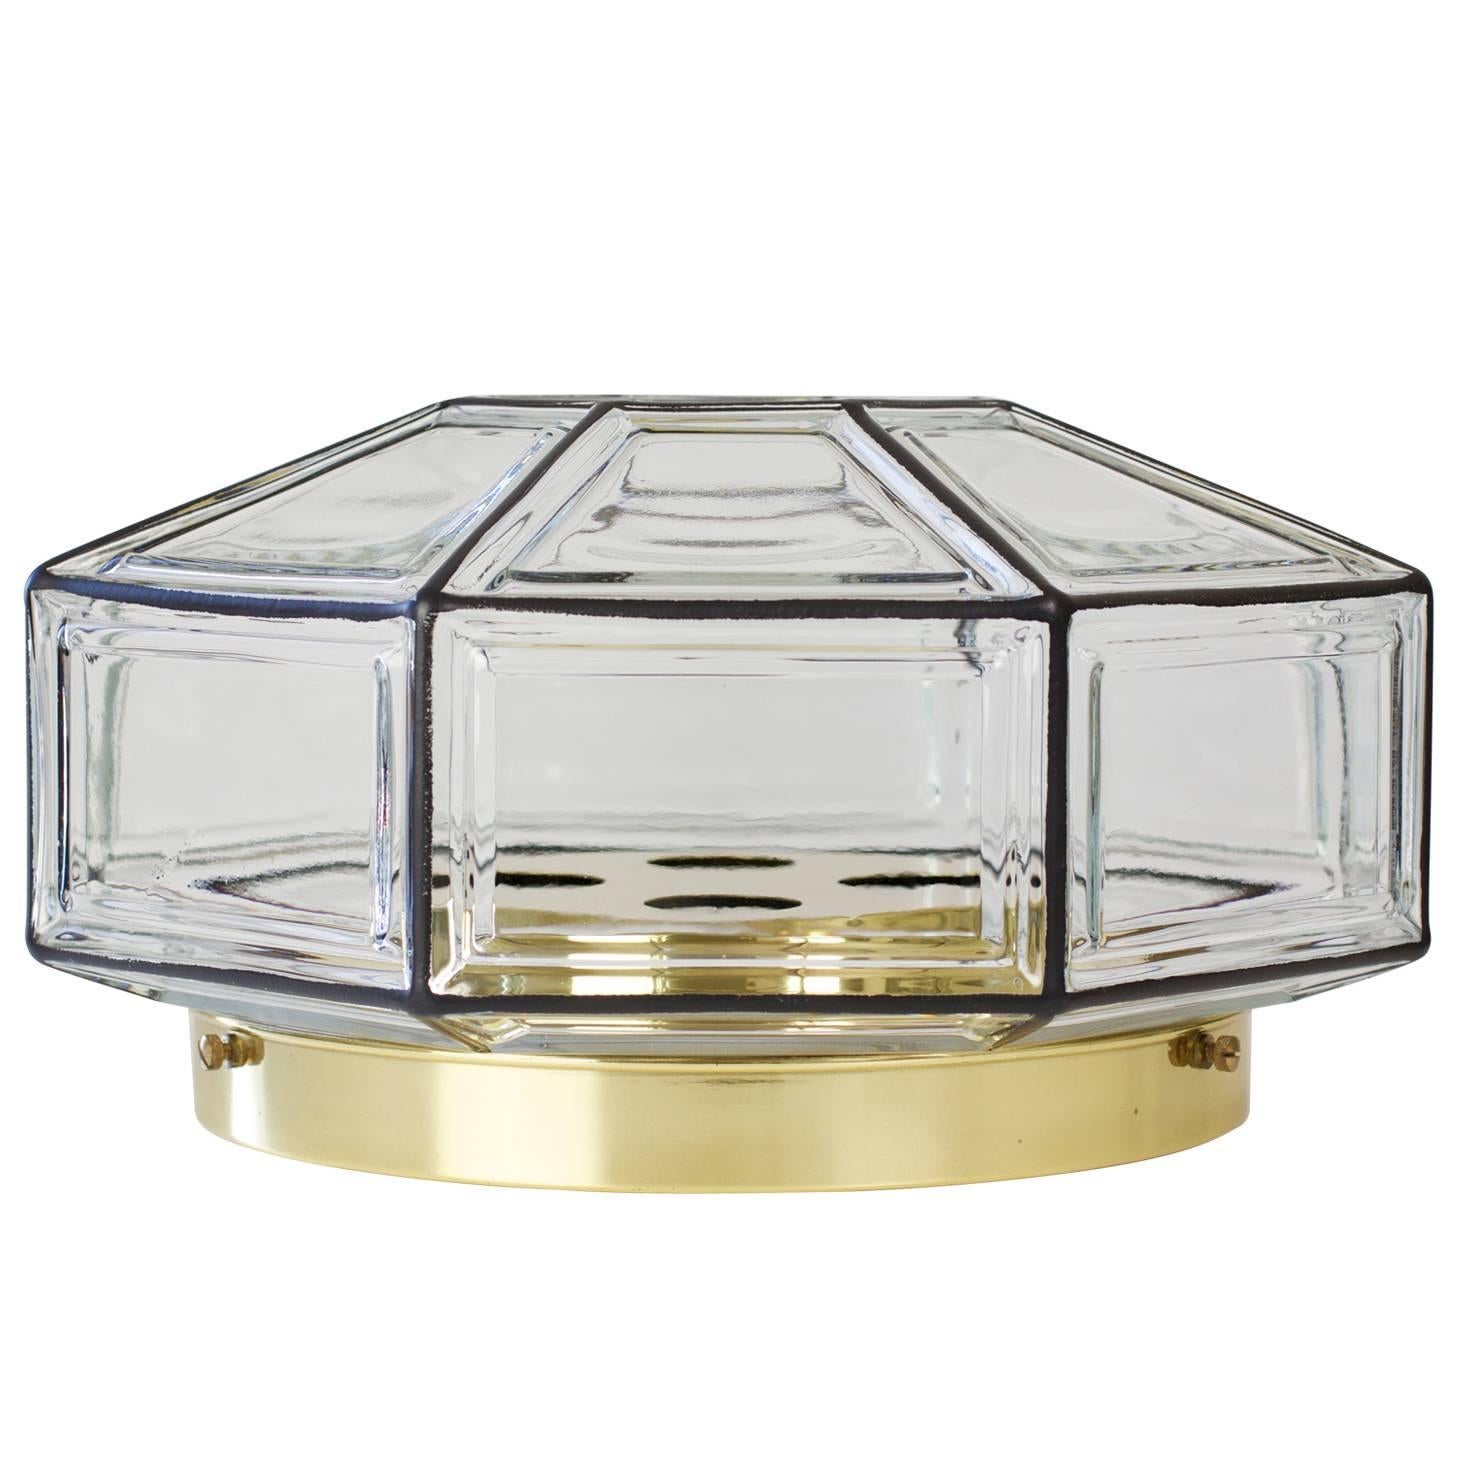 An extra large octagonally shaped, Mid-Century Modern and Minimalist German made flushmount light fixture produced by Glashütte Limburg, circa 1965. This Contemporary Art Deco and lantern style ceiling lamp casts a fantastic light when mounted on